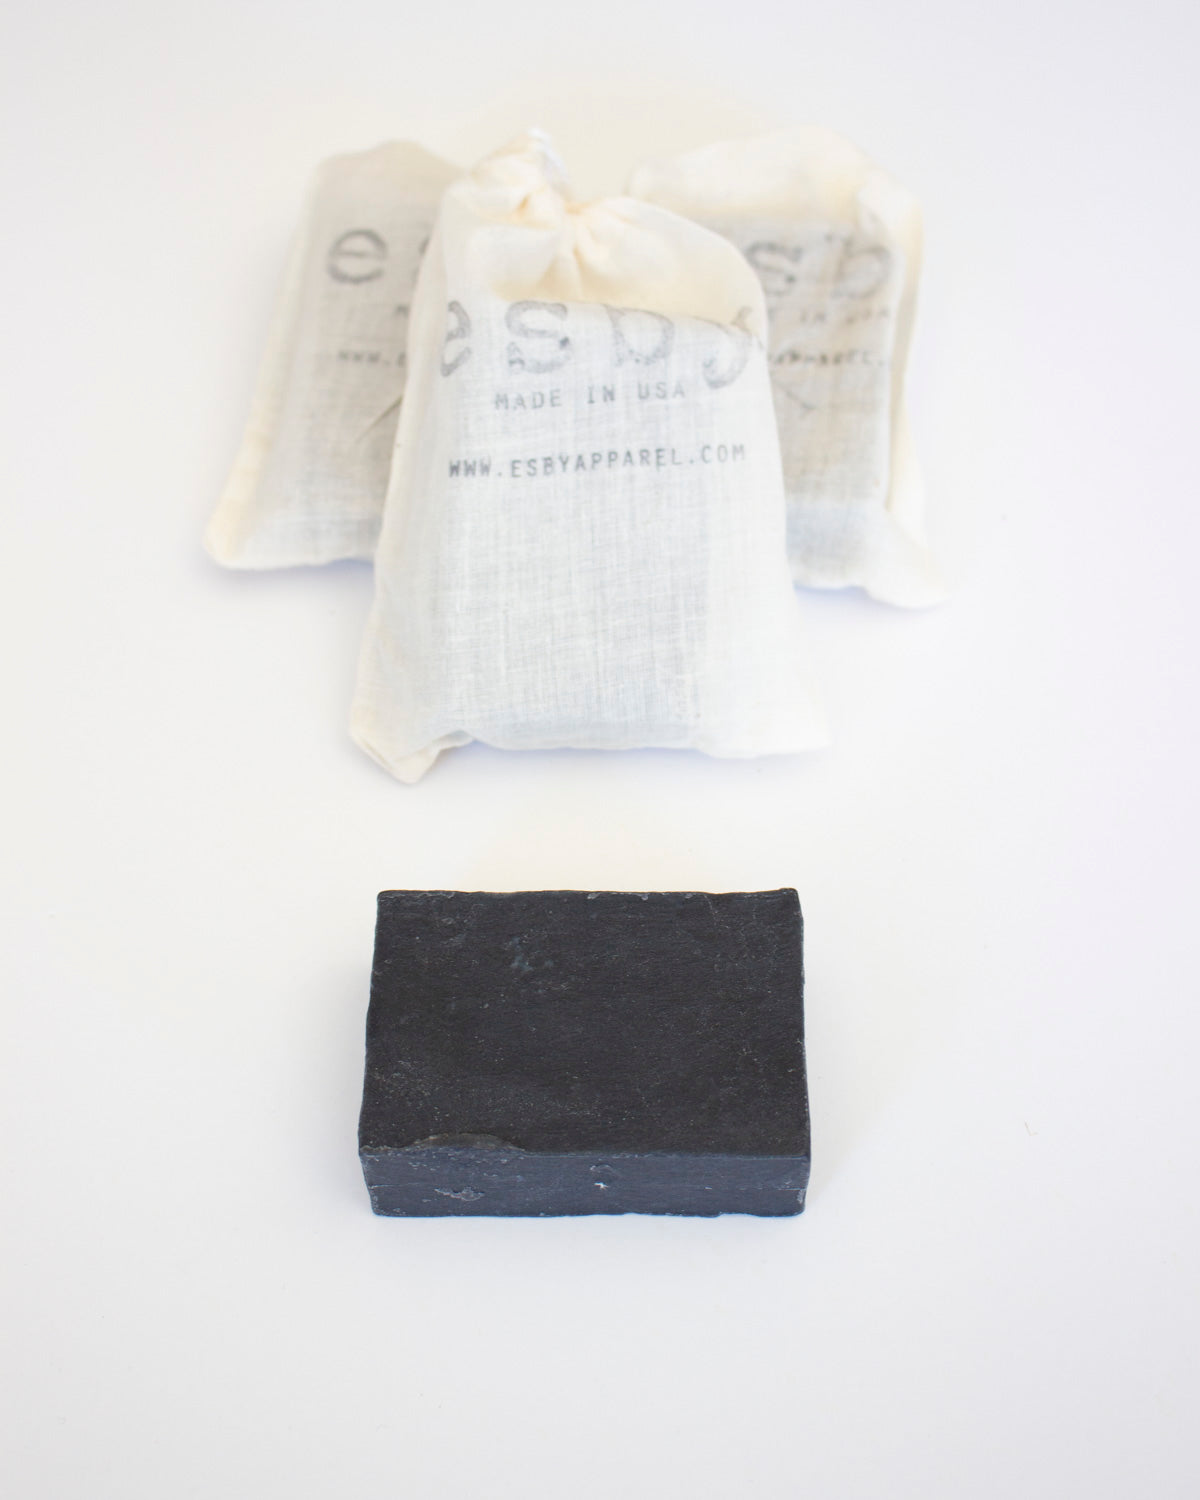 TEA TREE OIL SOAP -  ACTIVATED CHARCOAL